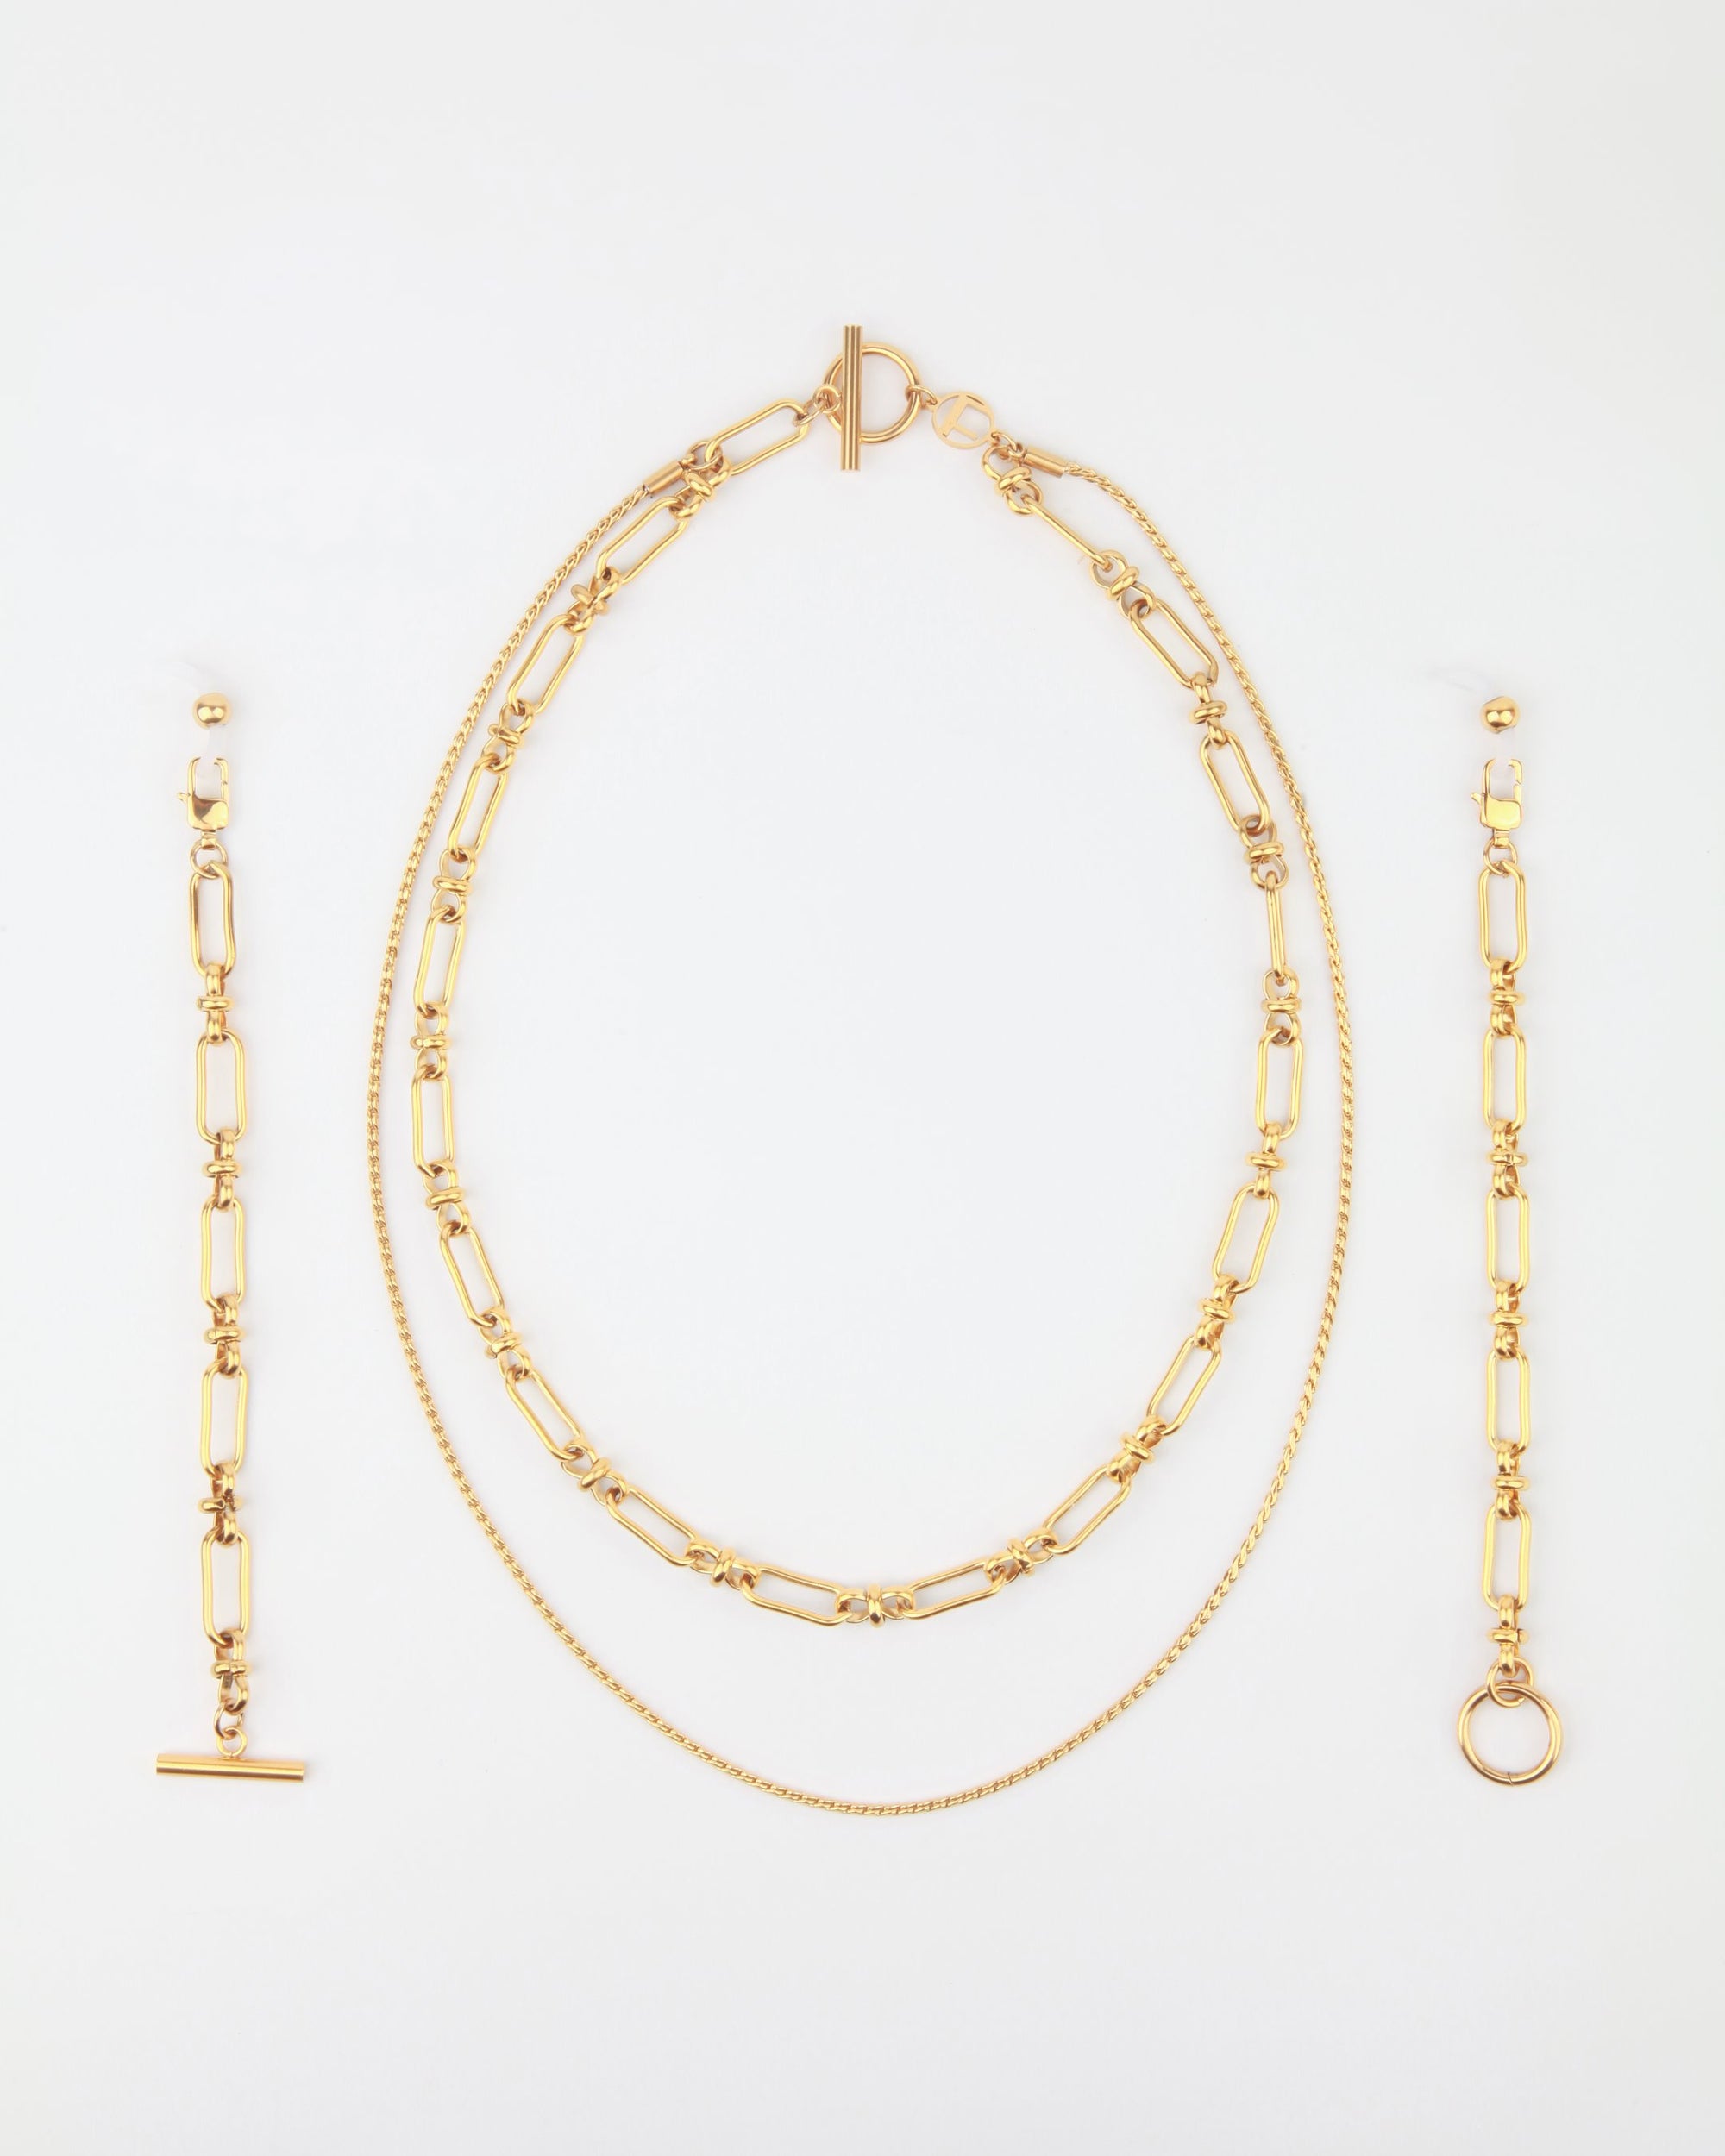 A Vienna Glasses Chain by For Art&#39;s Sake® against a white background, including a pair of dangling earrings, an 18-karat gold-plating layered necklace with both a chain and a linked design, and a bracelet featuring a similar linked pattern. The pieces are neatly arranged in a vertical orientation.